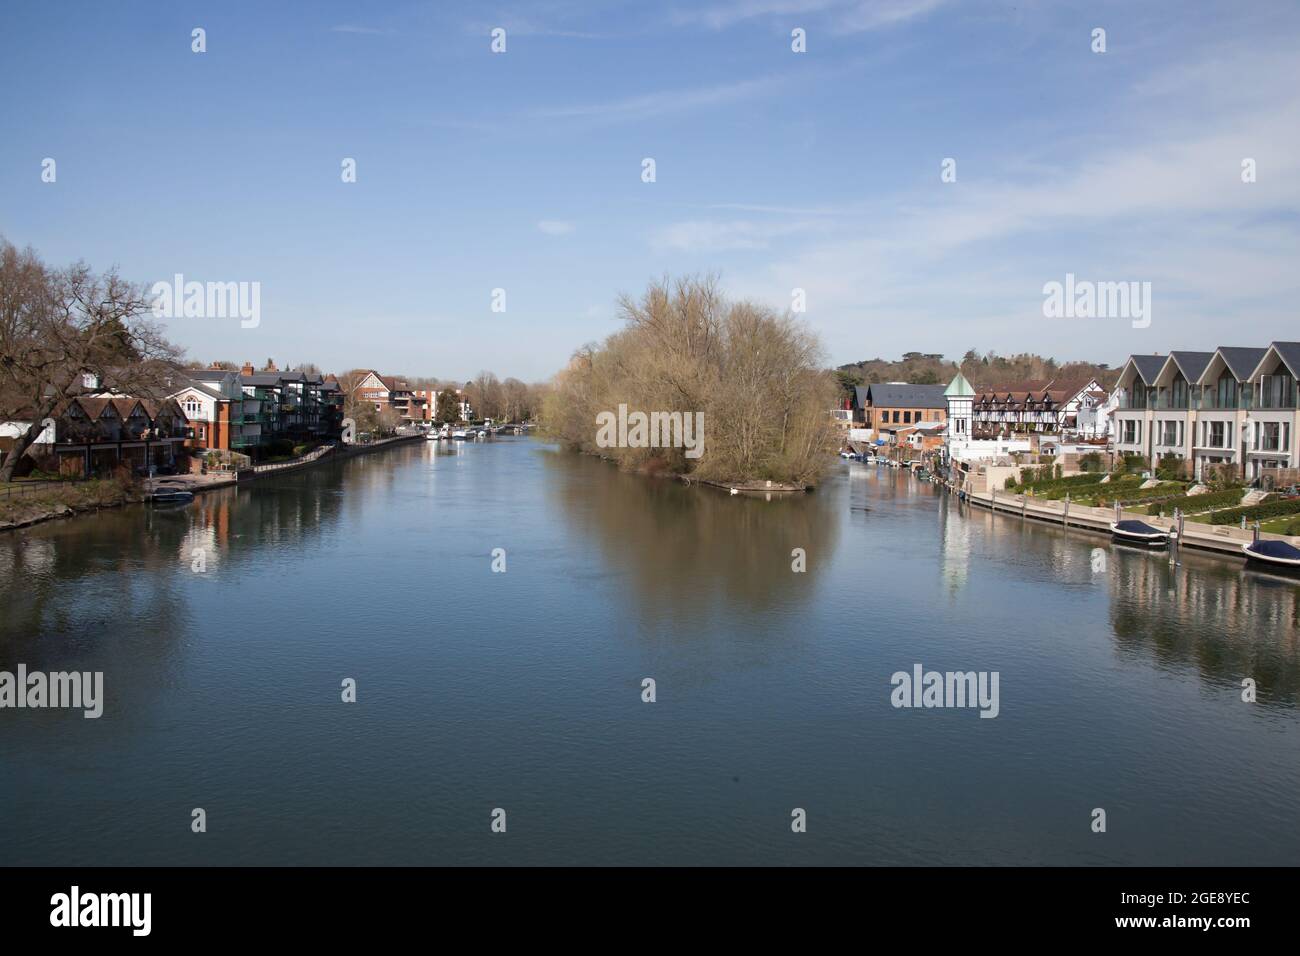 Views of the Thames River at Maidenhead in Berkshire in the UK Stock Photo